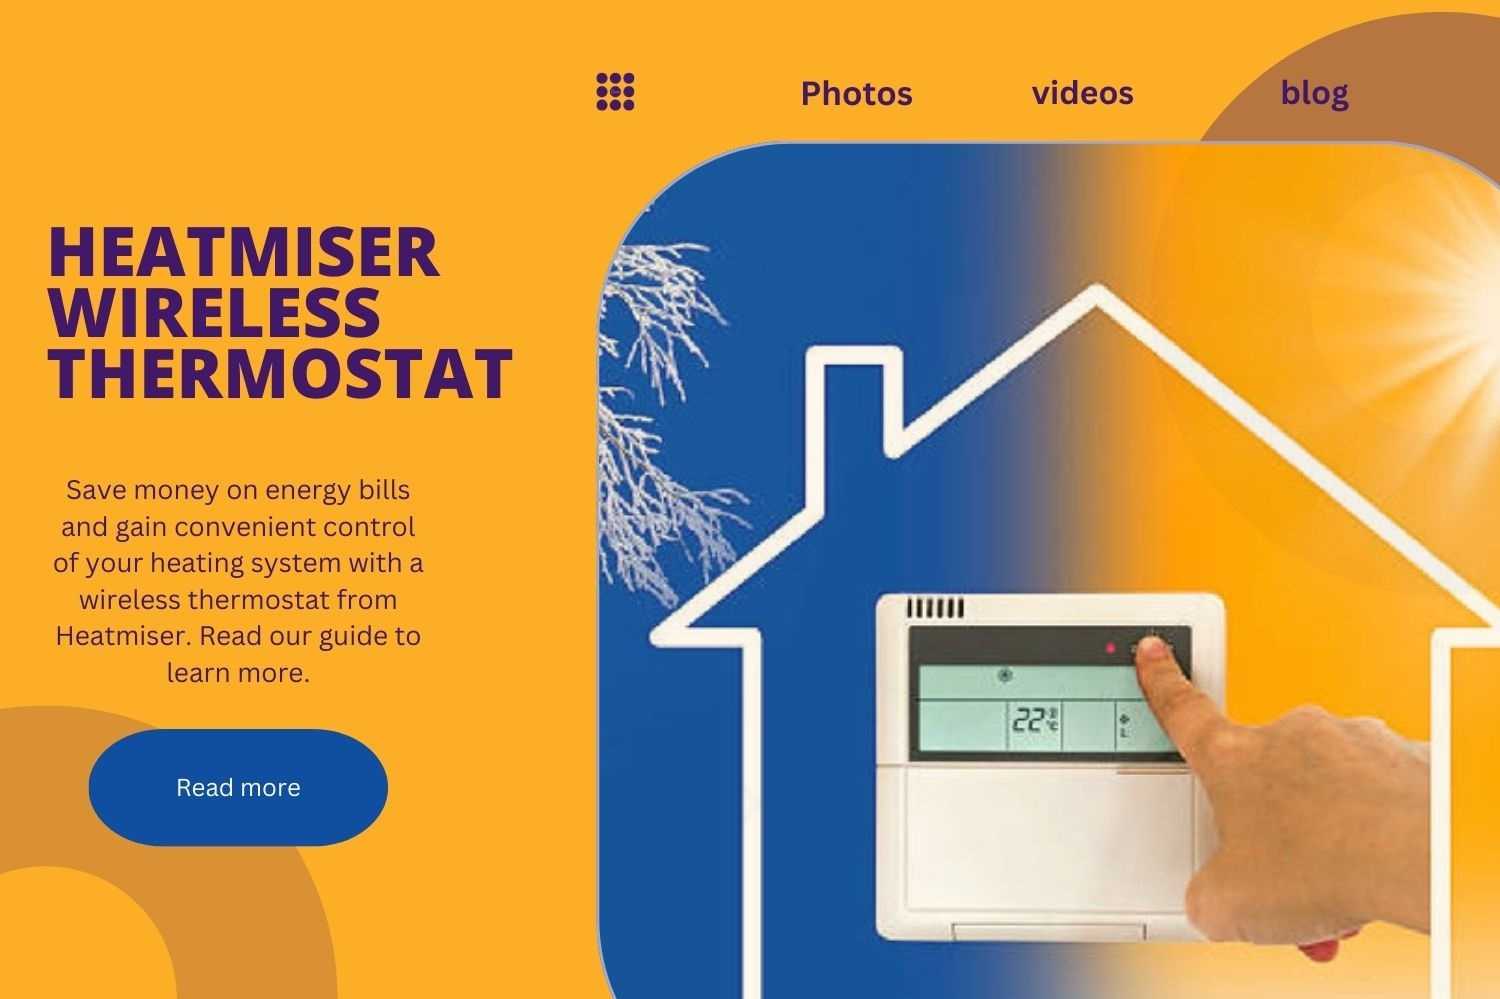 A sleek Heatmiser wireless thermostat controlling room temperature